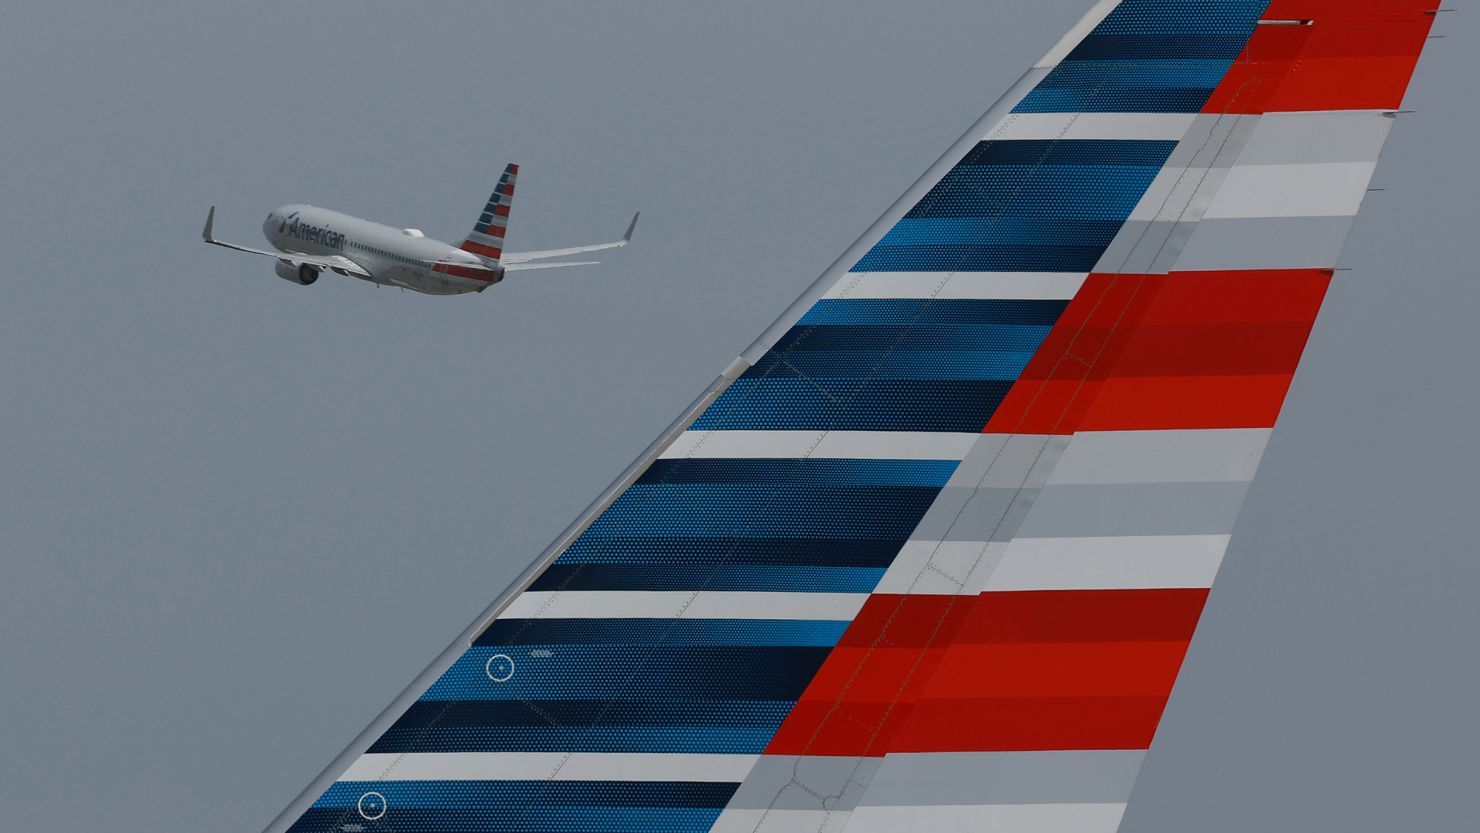 American Airlines Pilots Highlight Urgent Safety Woes Amid Increasing Air Travel Concerns